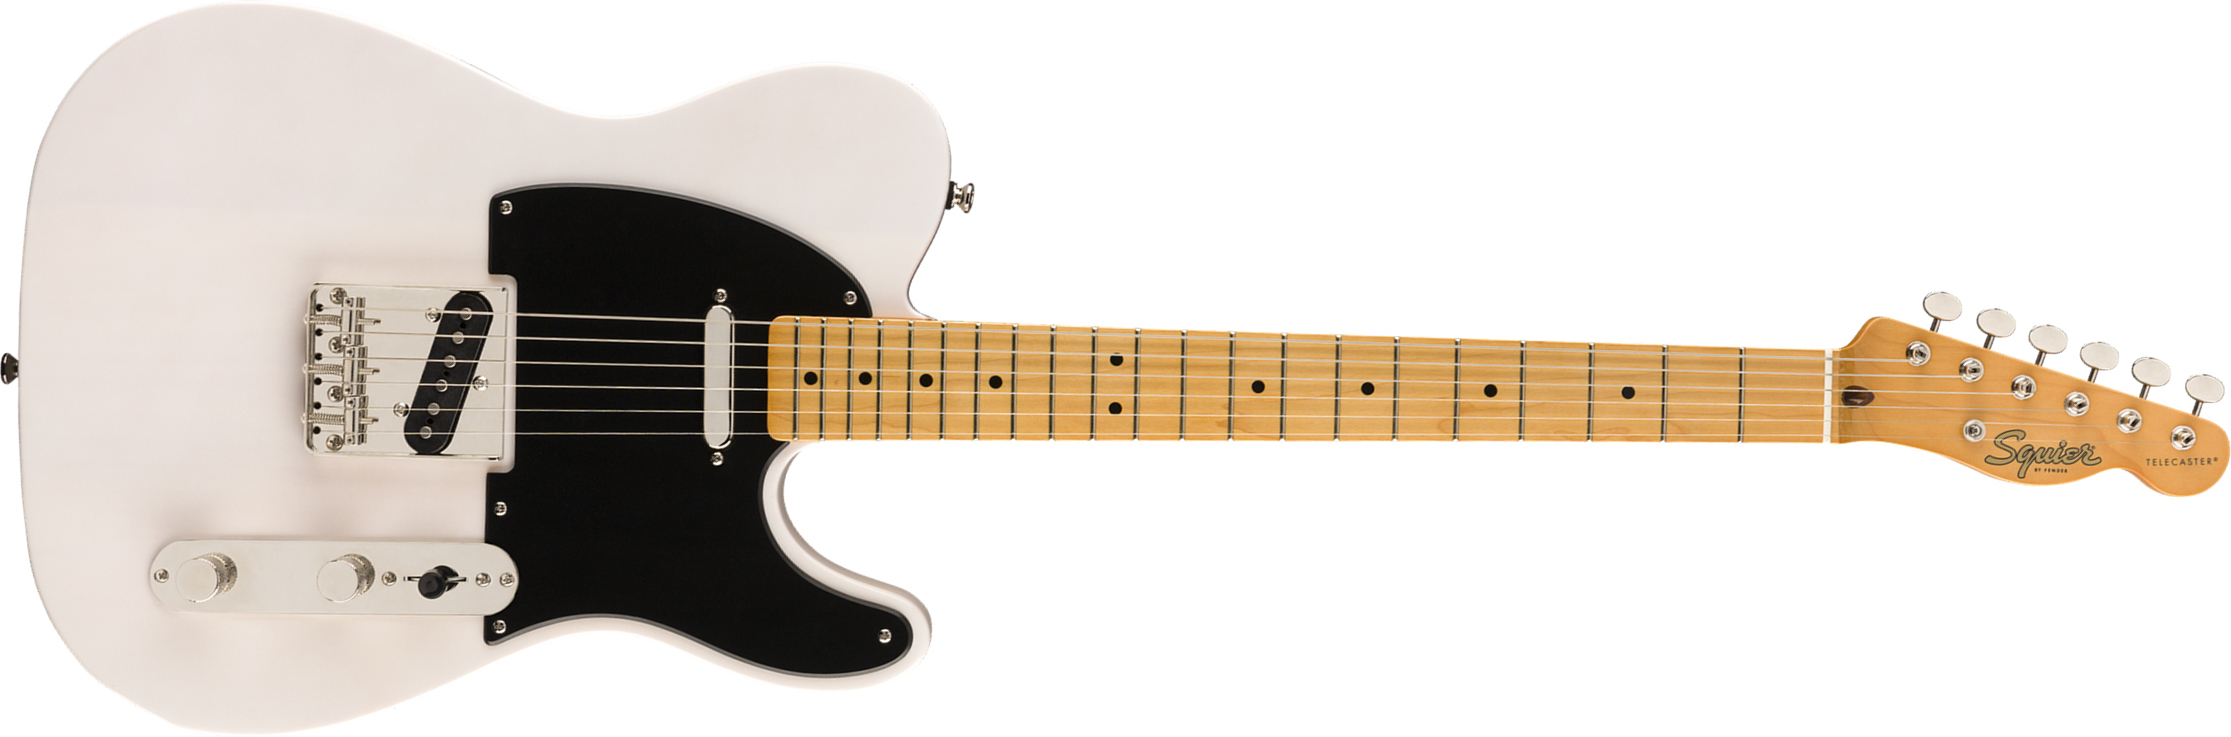 Squier Tele '50s Classic Vibe 2019 Mn 2019 - White Blonde - Tel shape electric guitar - Main picture